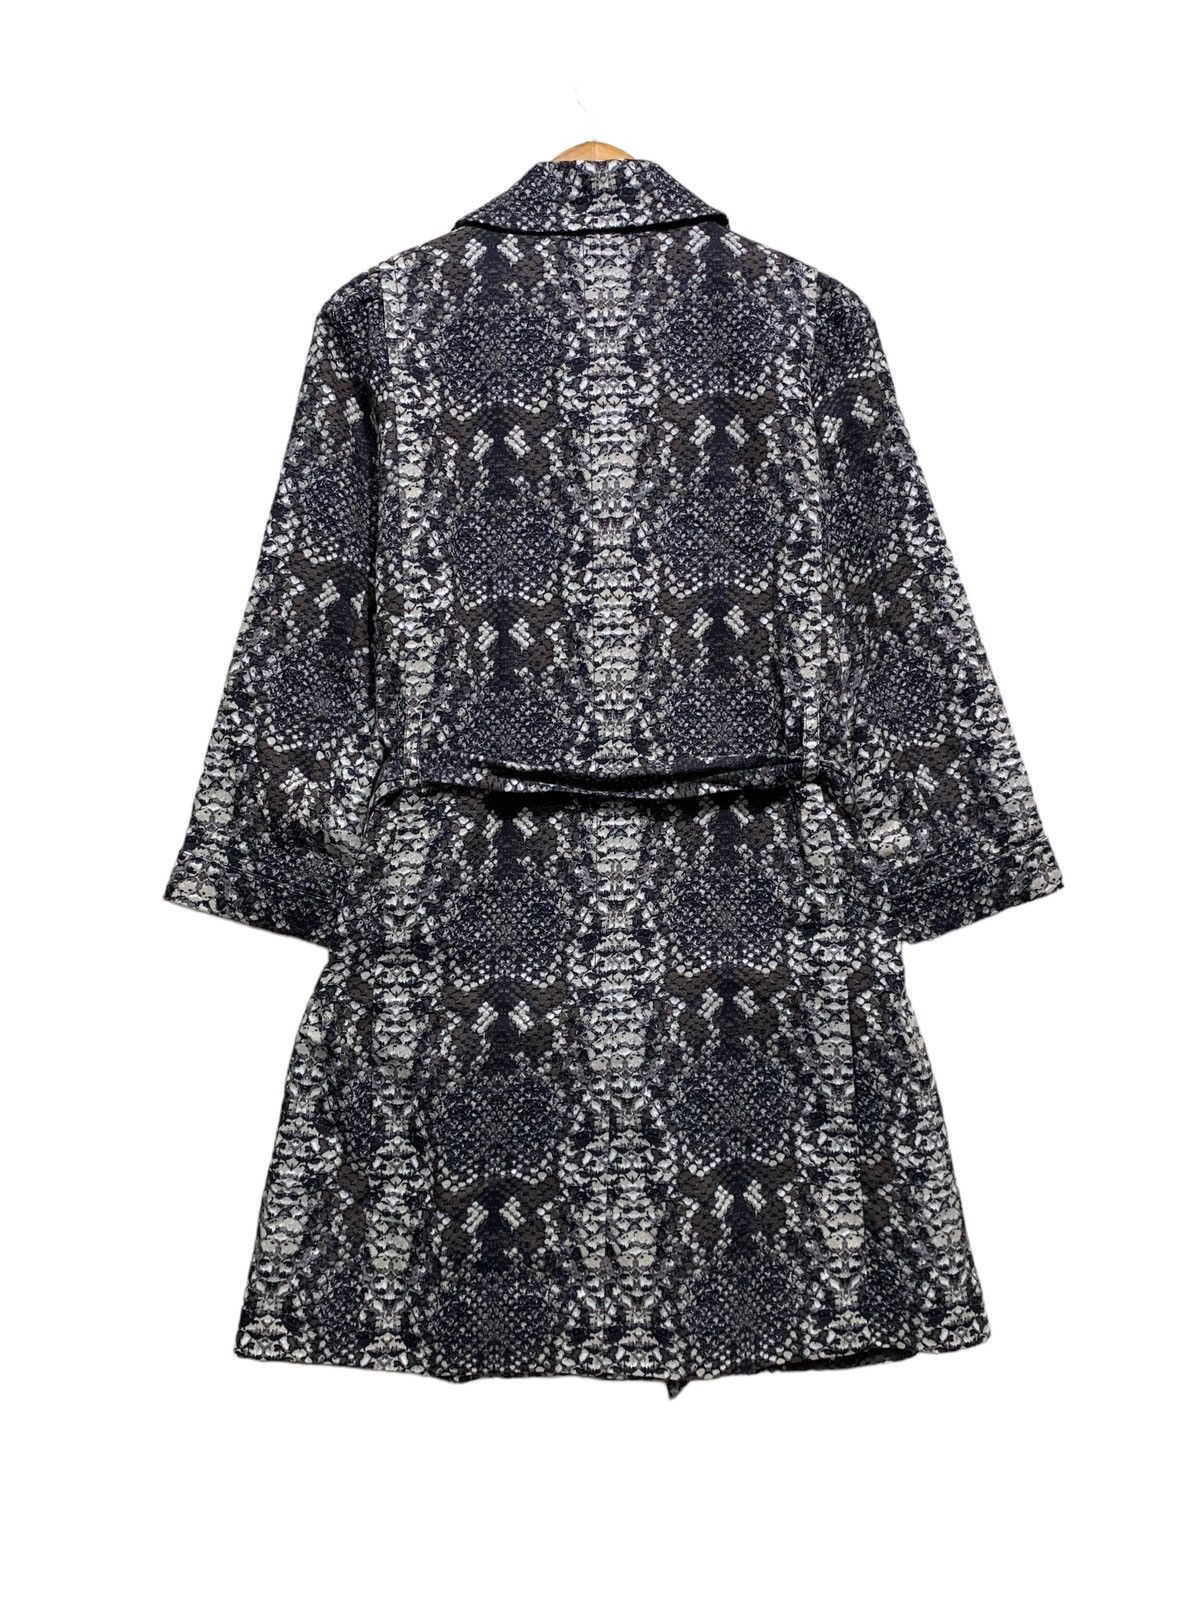 🔥MARC JACOBS SNAKESKIN PRINTED TRENCHCOATS - 5